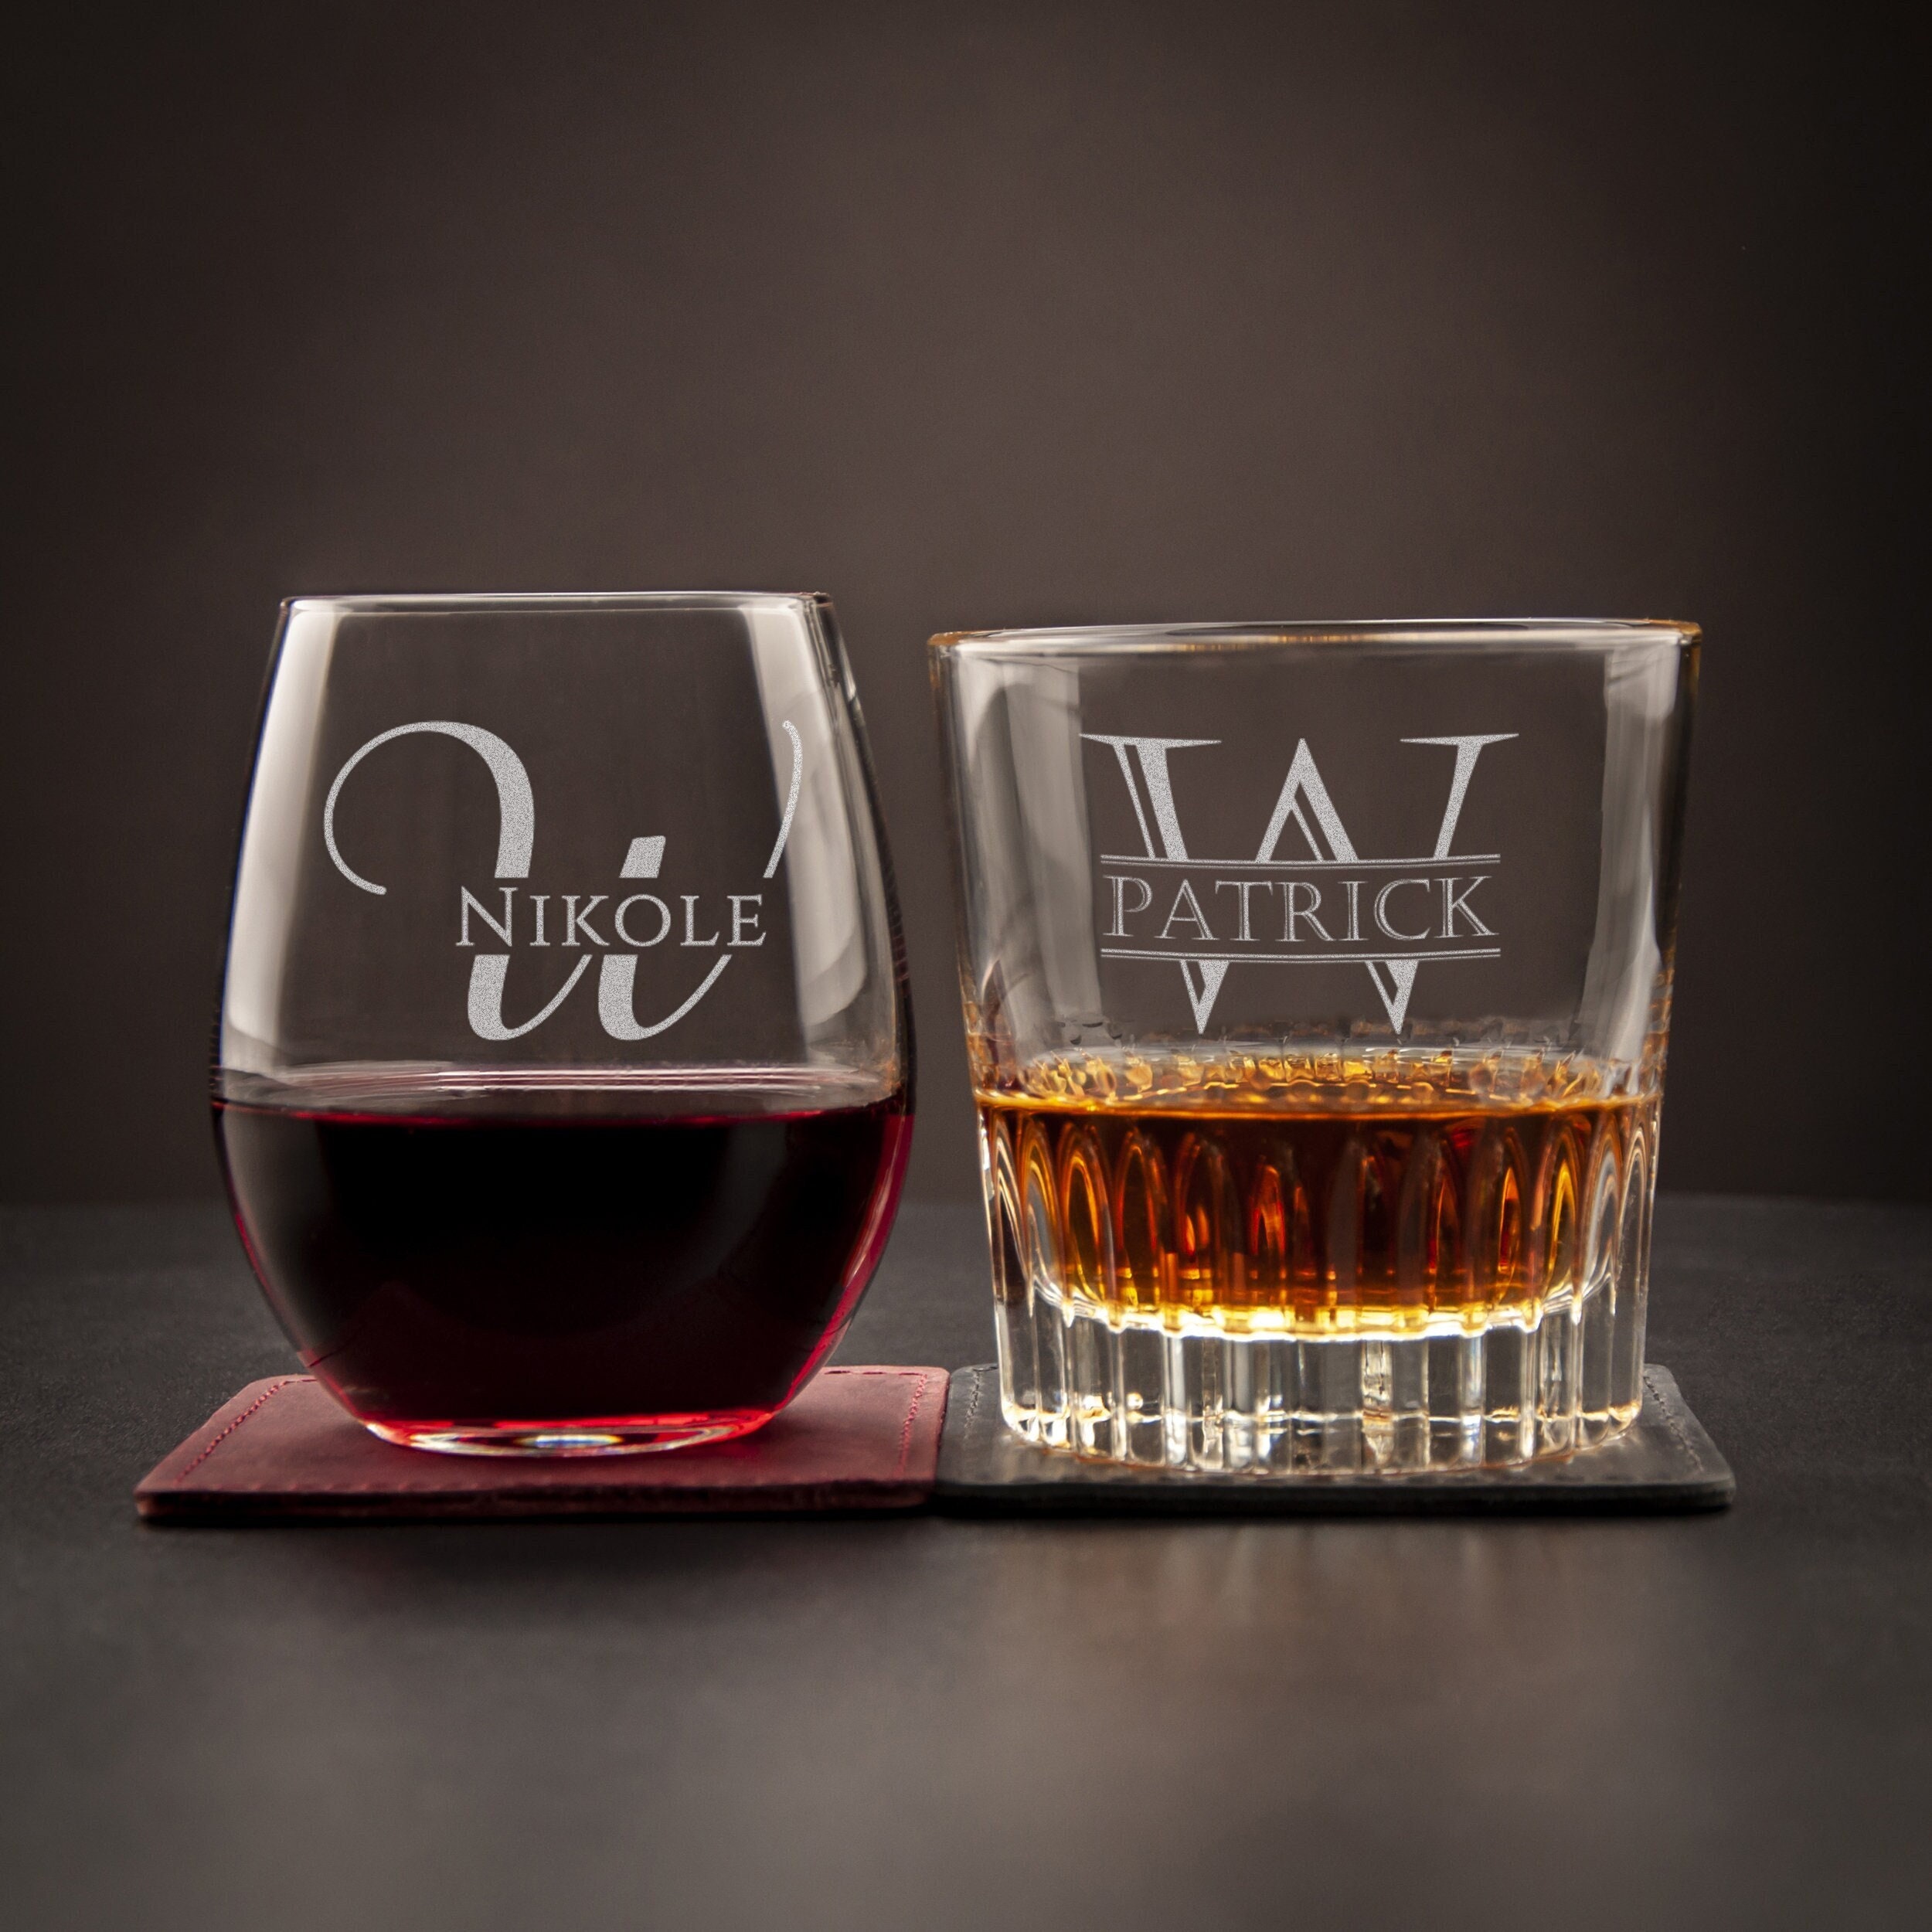 RorAem Whiskey Glasses and Wine Glasses Set - Engagement Gifts for Couples  Boyfriend and Girlfriend …See more RorAem Whiskey Glasses and Wine Glasses